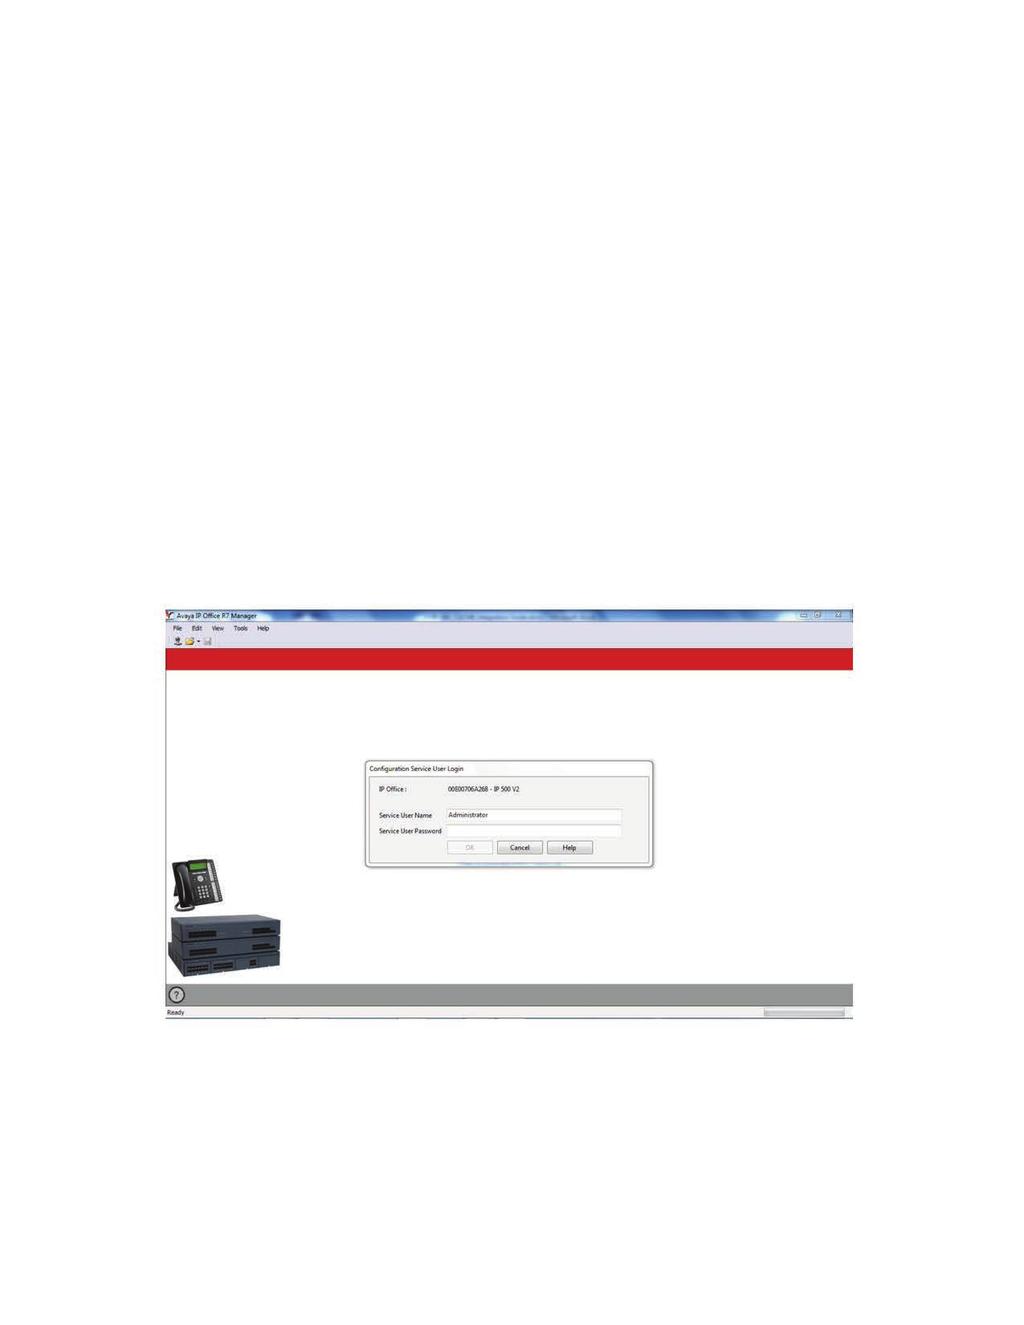 17 Avaya IP Office Integration Guide Introduction This Avaya IP Office Integration Guide provides general instructions for integration of the IP1500/2500/5000 Series Phones with an IP Office